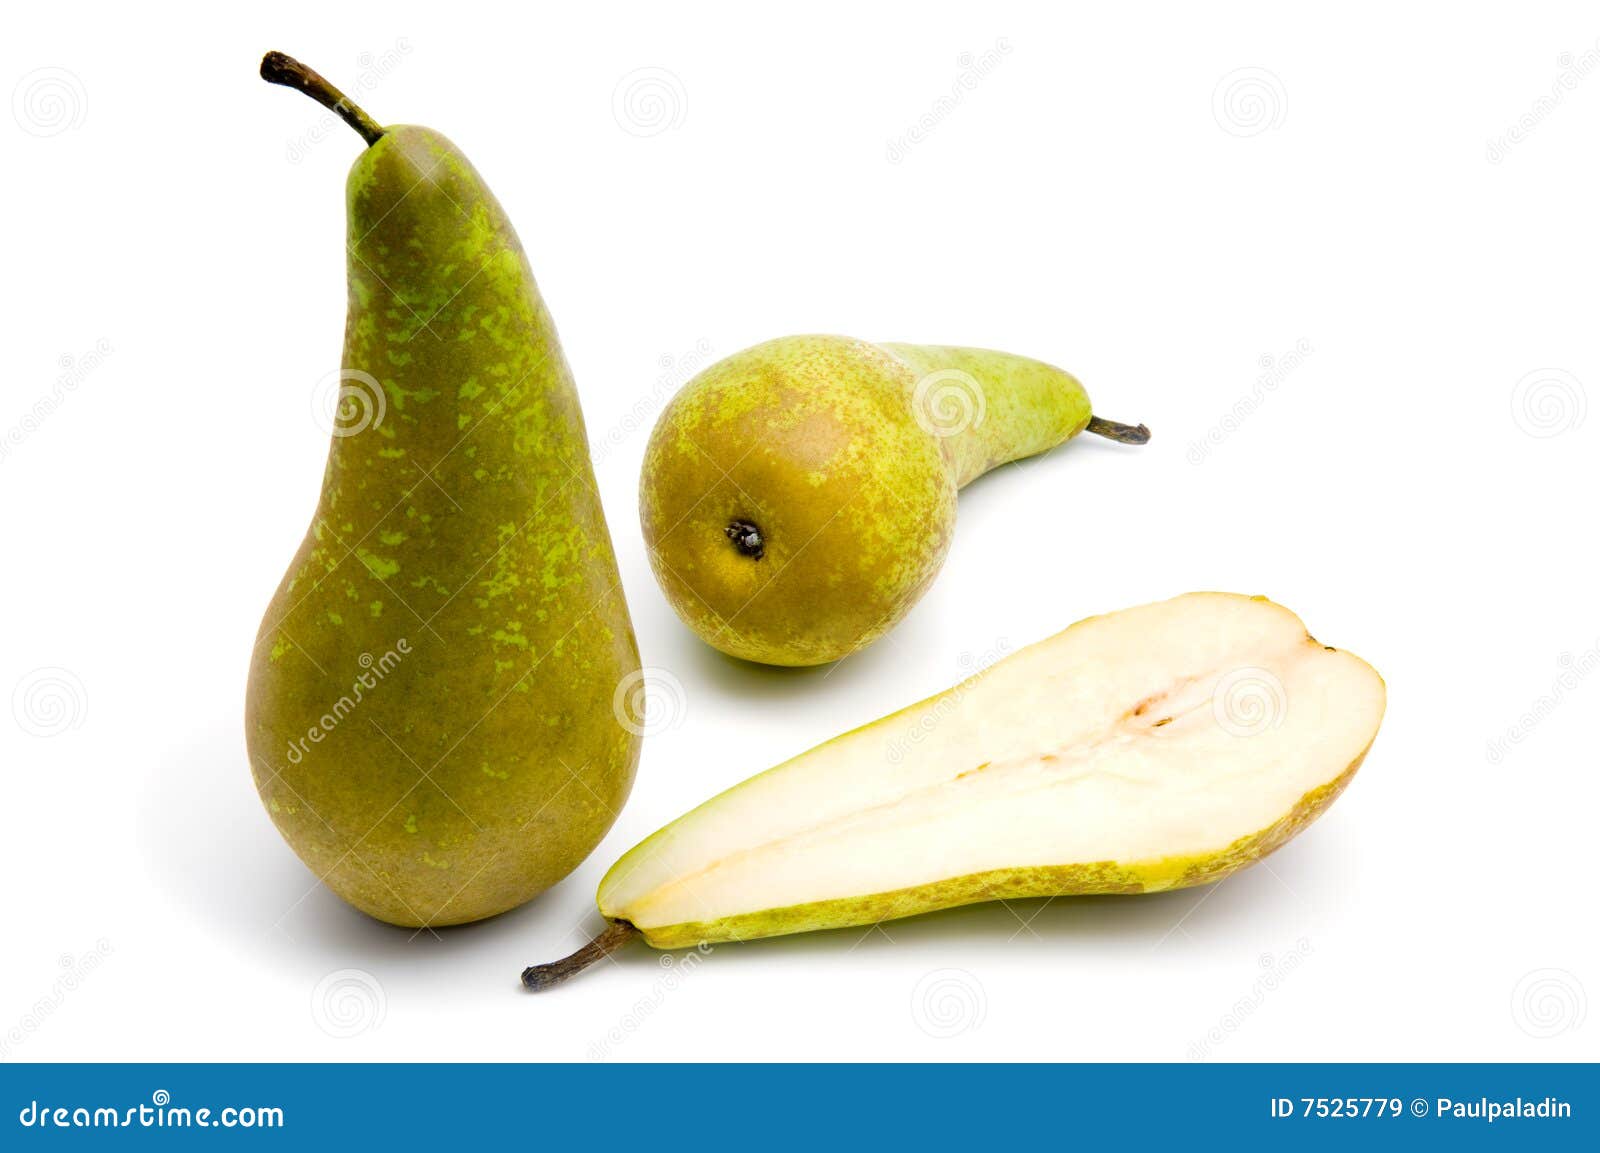 pear (conference)